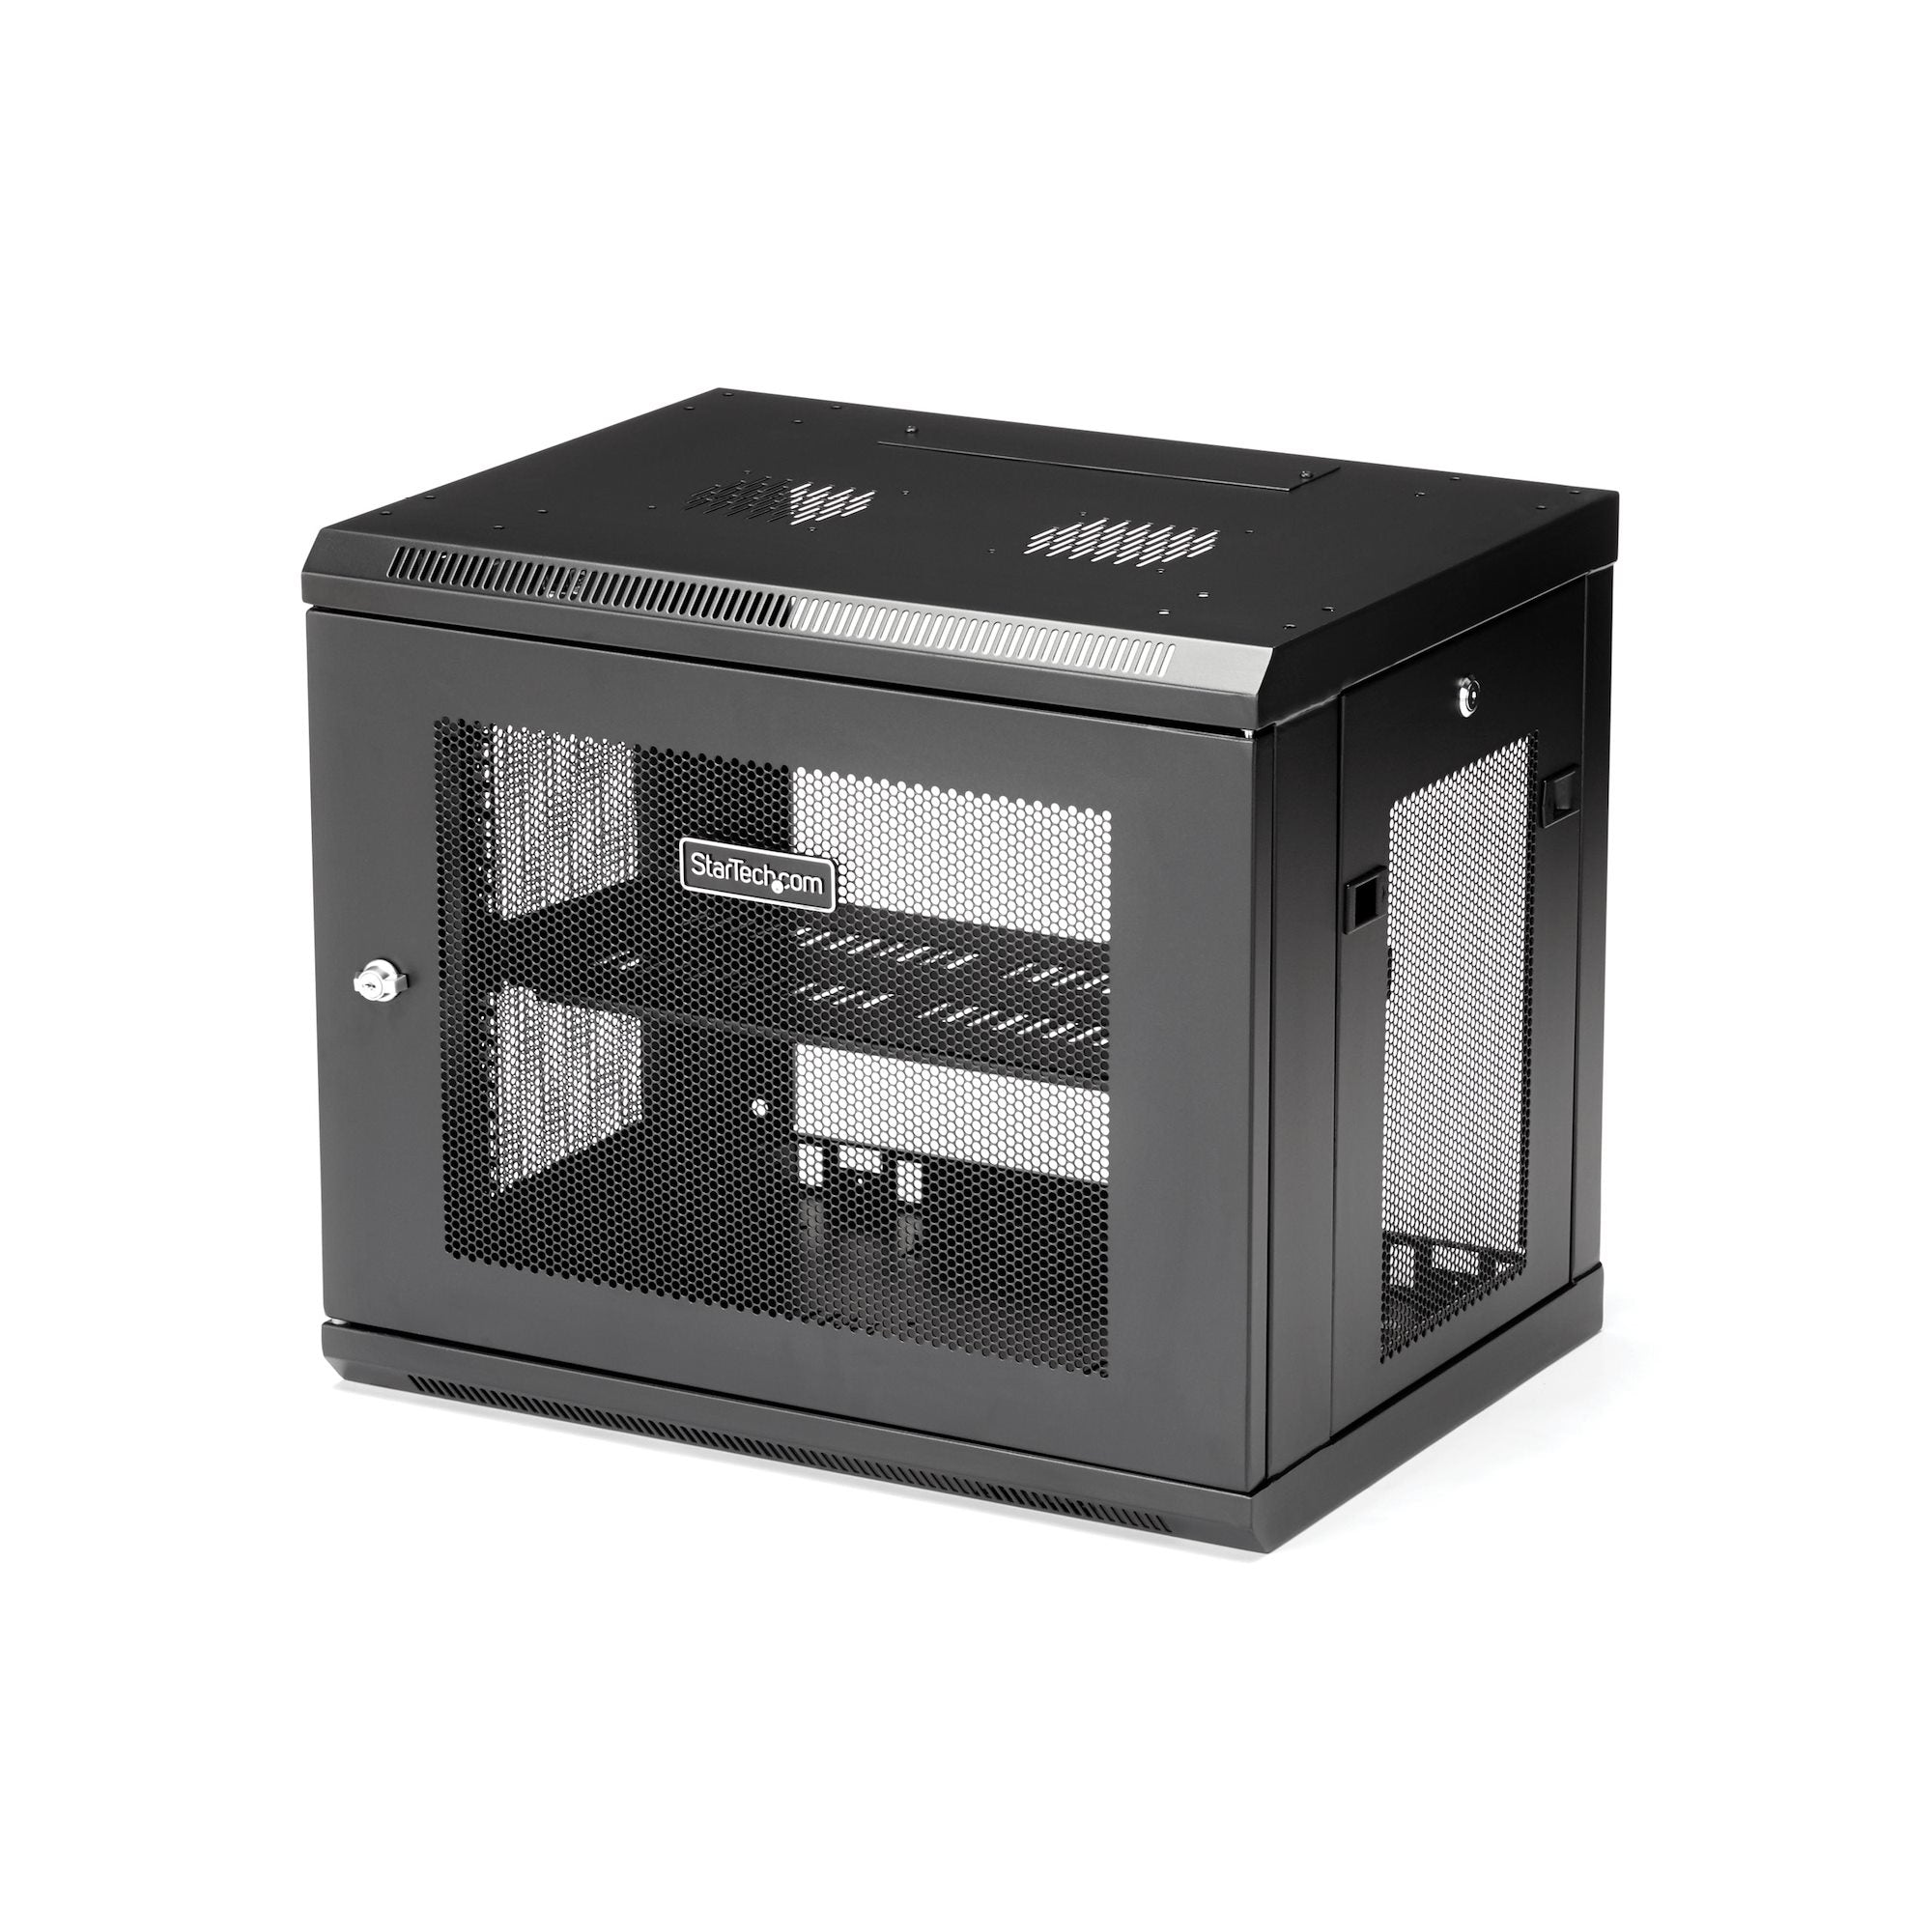 StarTech.com 2-Post 9U Wall Mount Network Cabinet with 1U Shelf, 19" Wall-Mounted Server Rack for Data / Networking / AV / Electronics / Computer Equipment, Small Vented Rack Enclosure